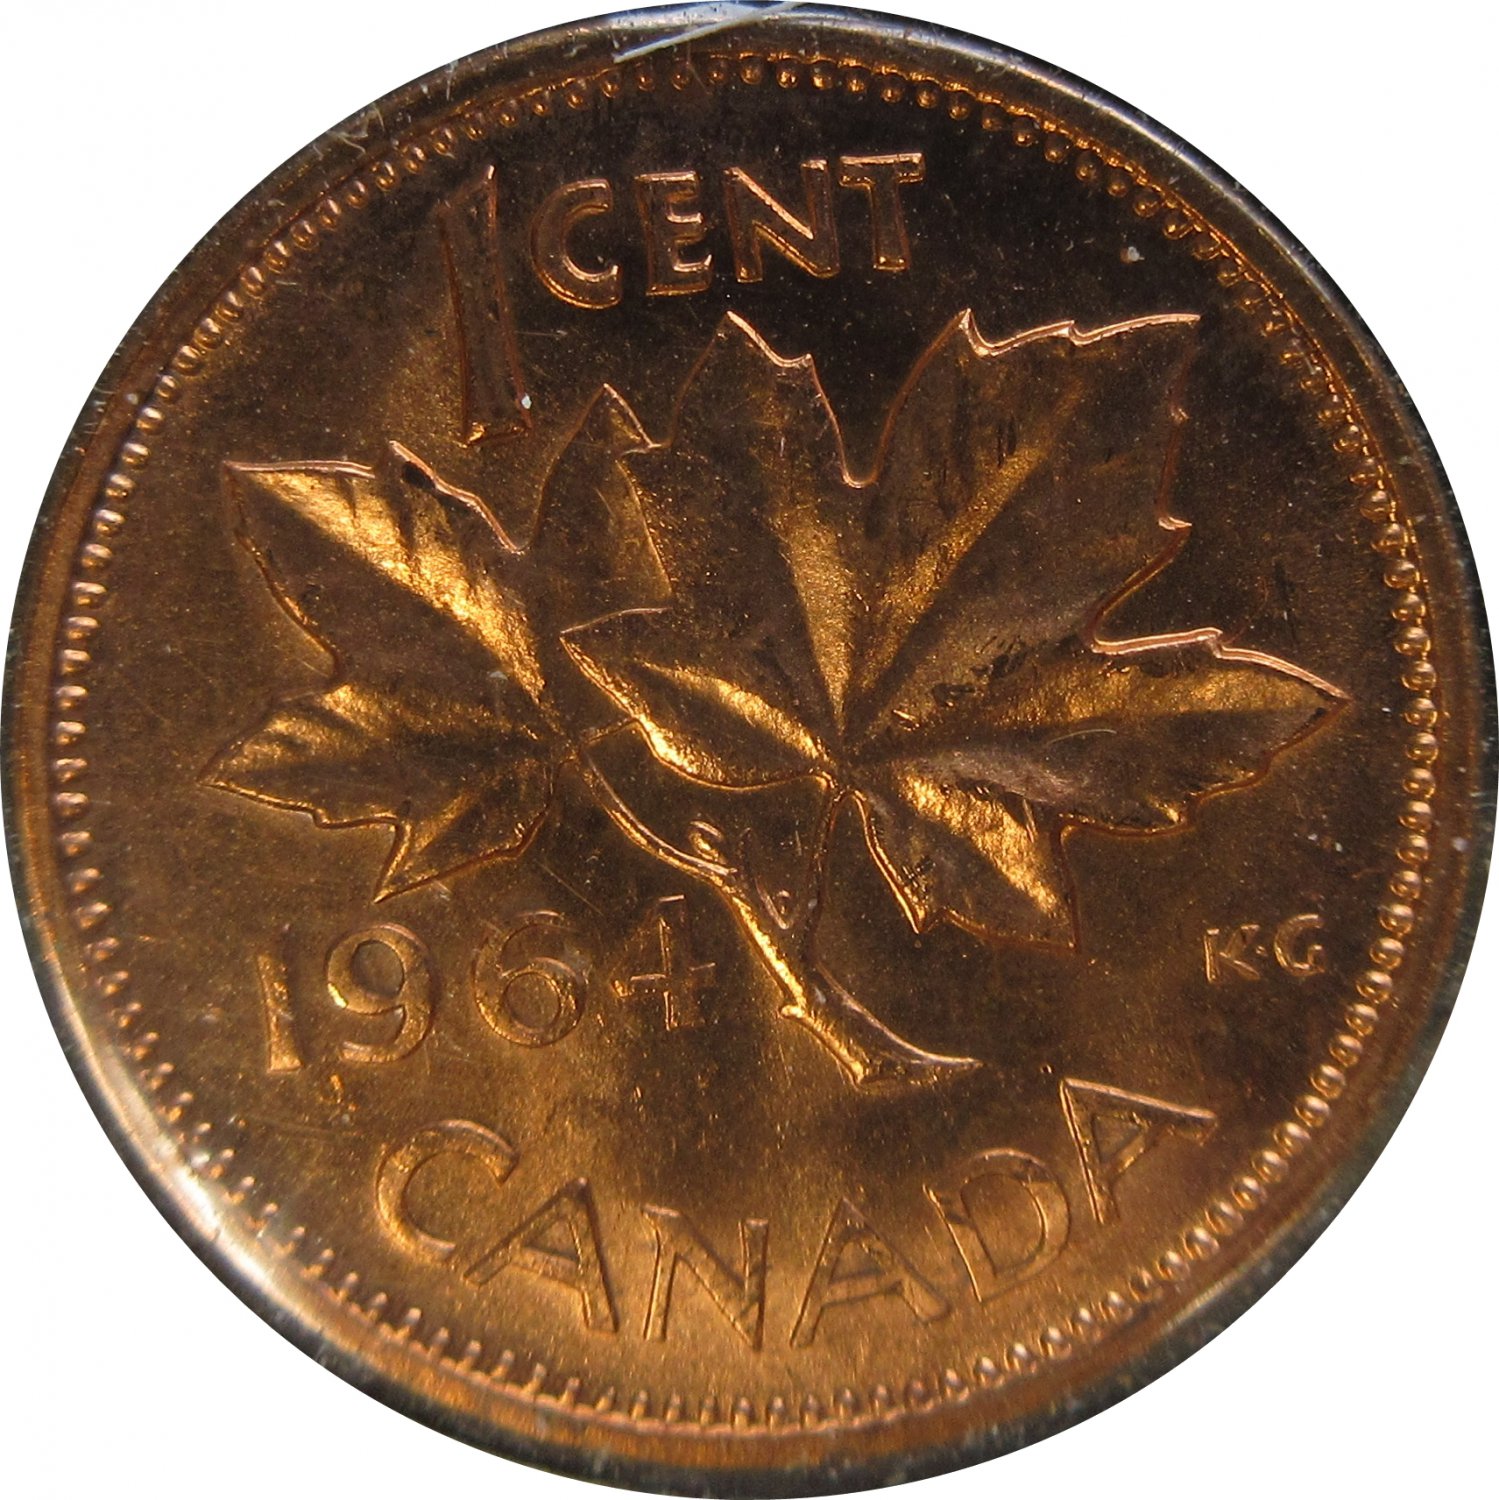 1964 canadian penny